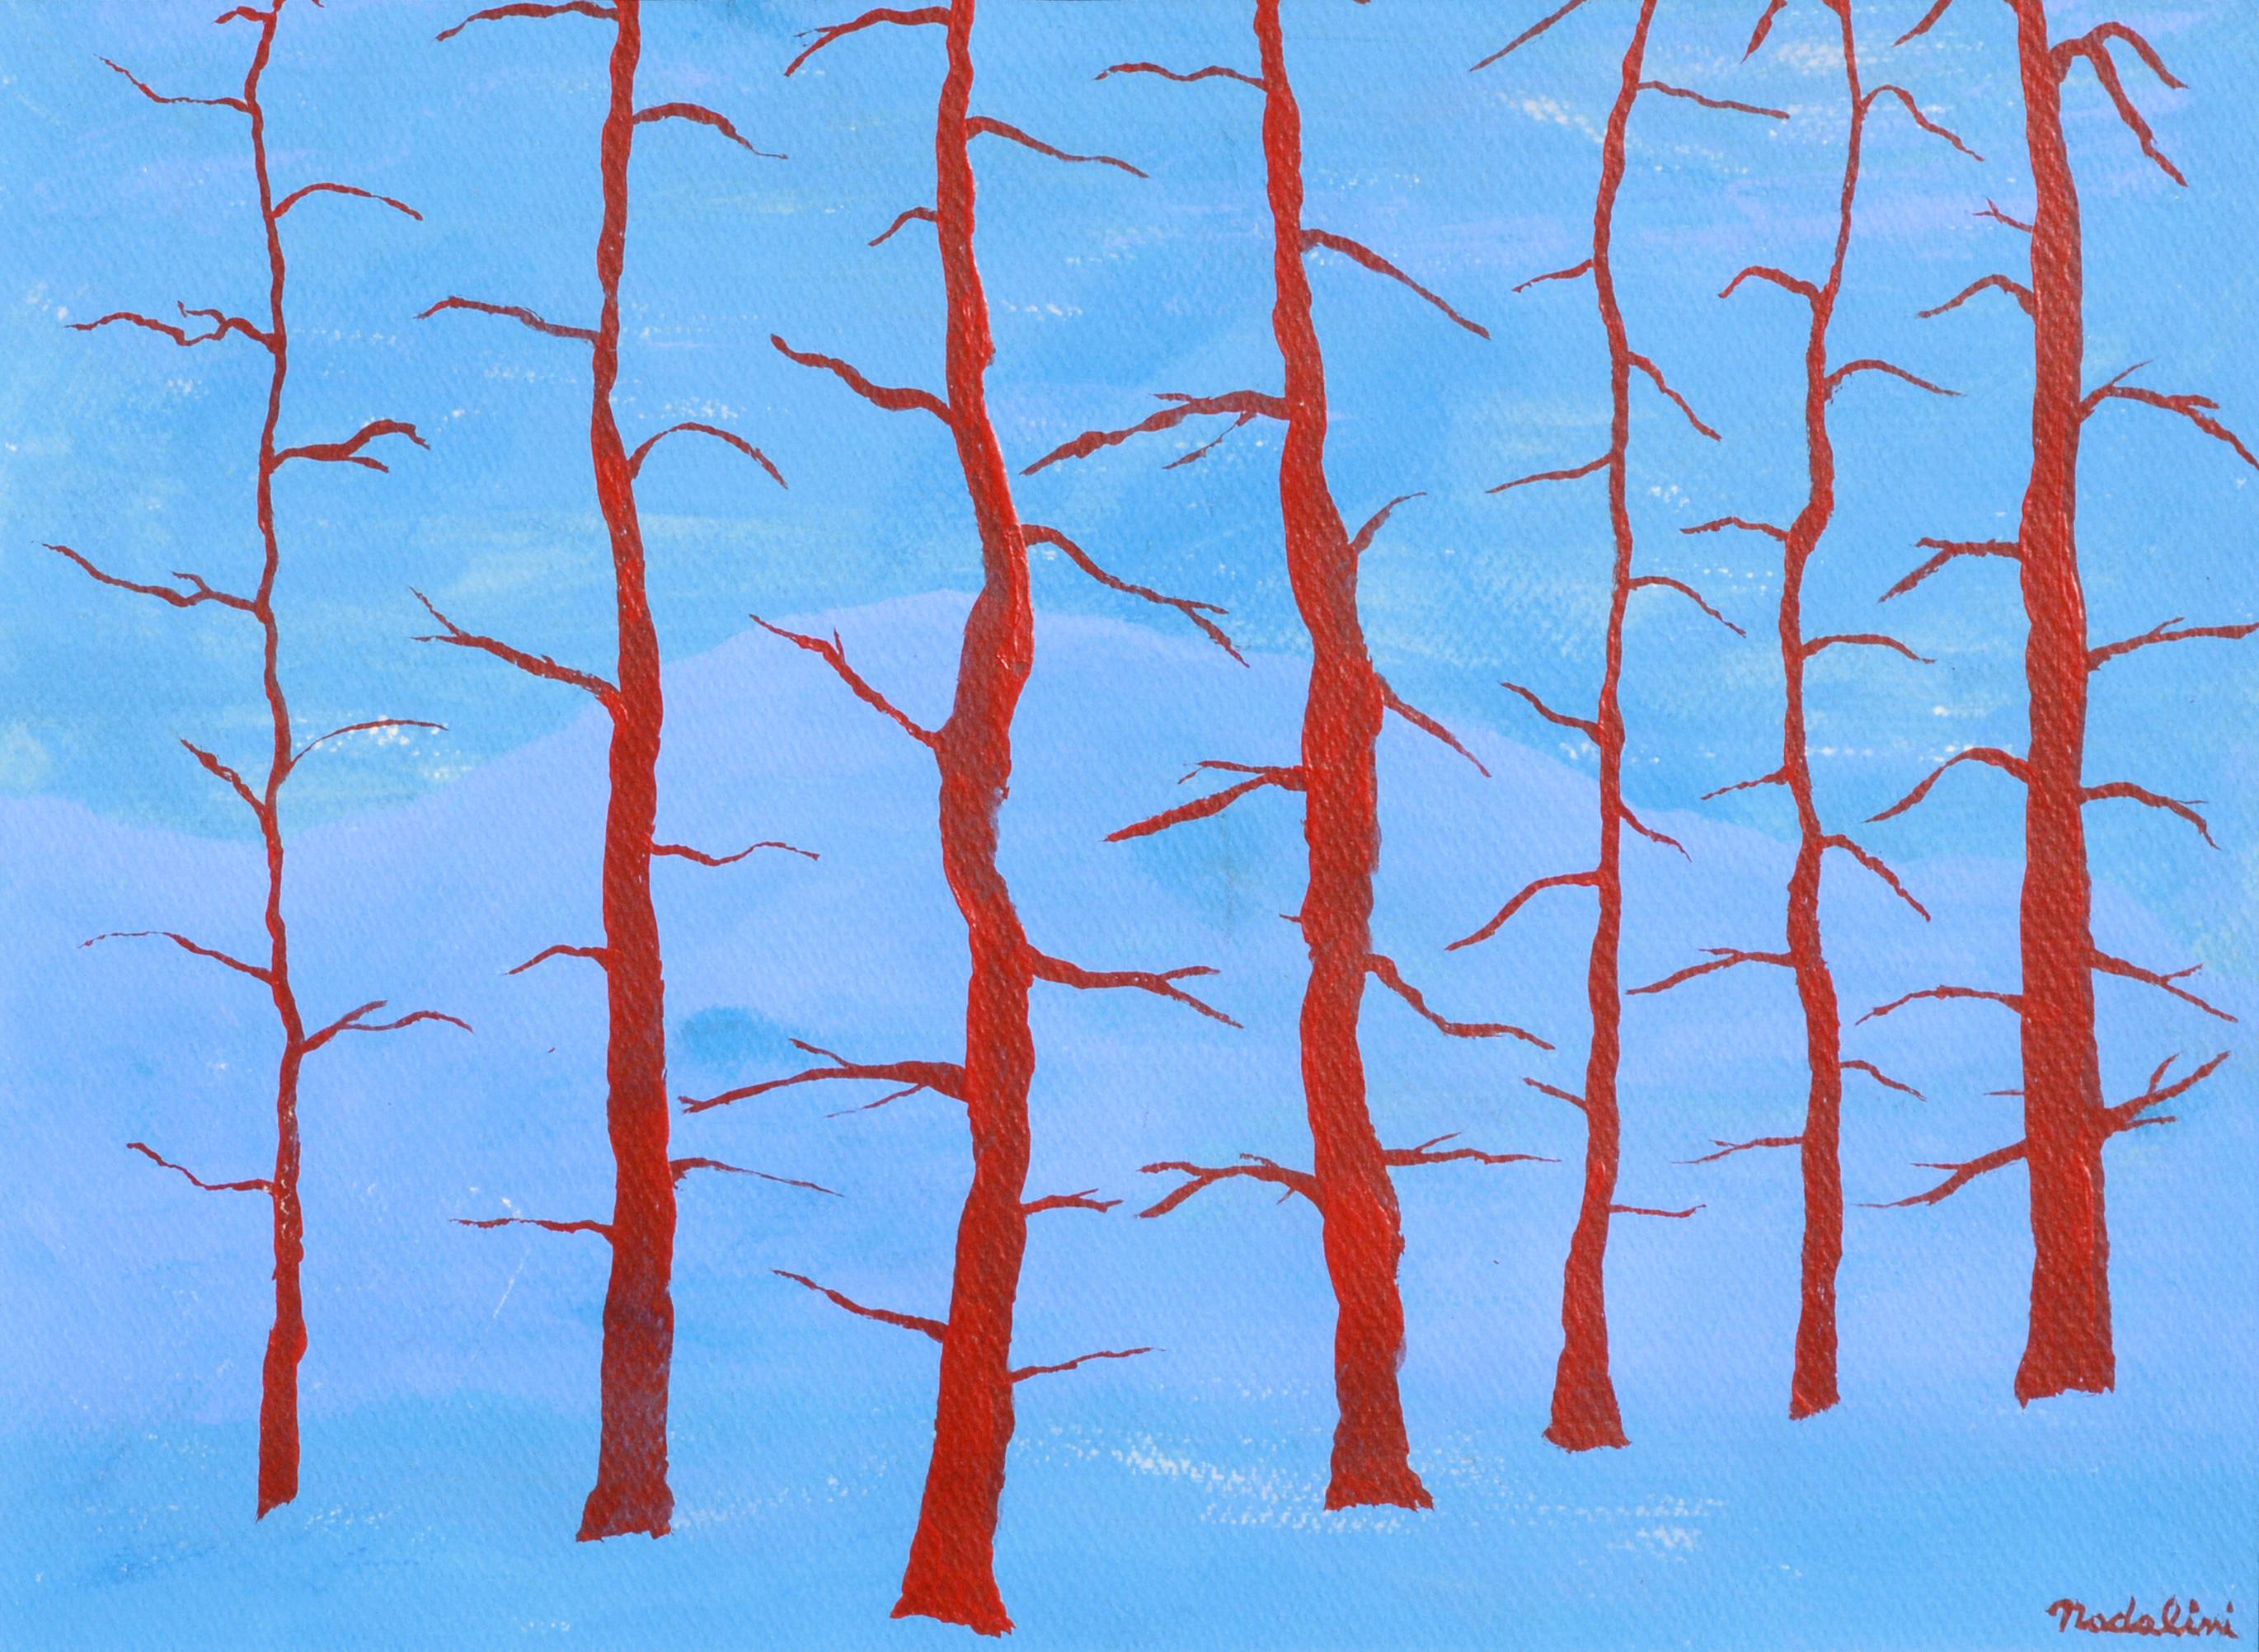 Red Trees, Hard-Edge Red & Blue Abstract Minimalist Landscape - Painting by Louis Earnest Nadalini